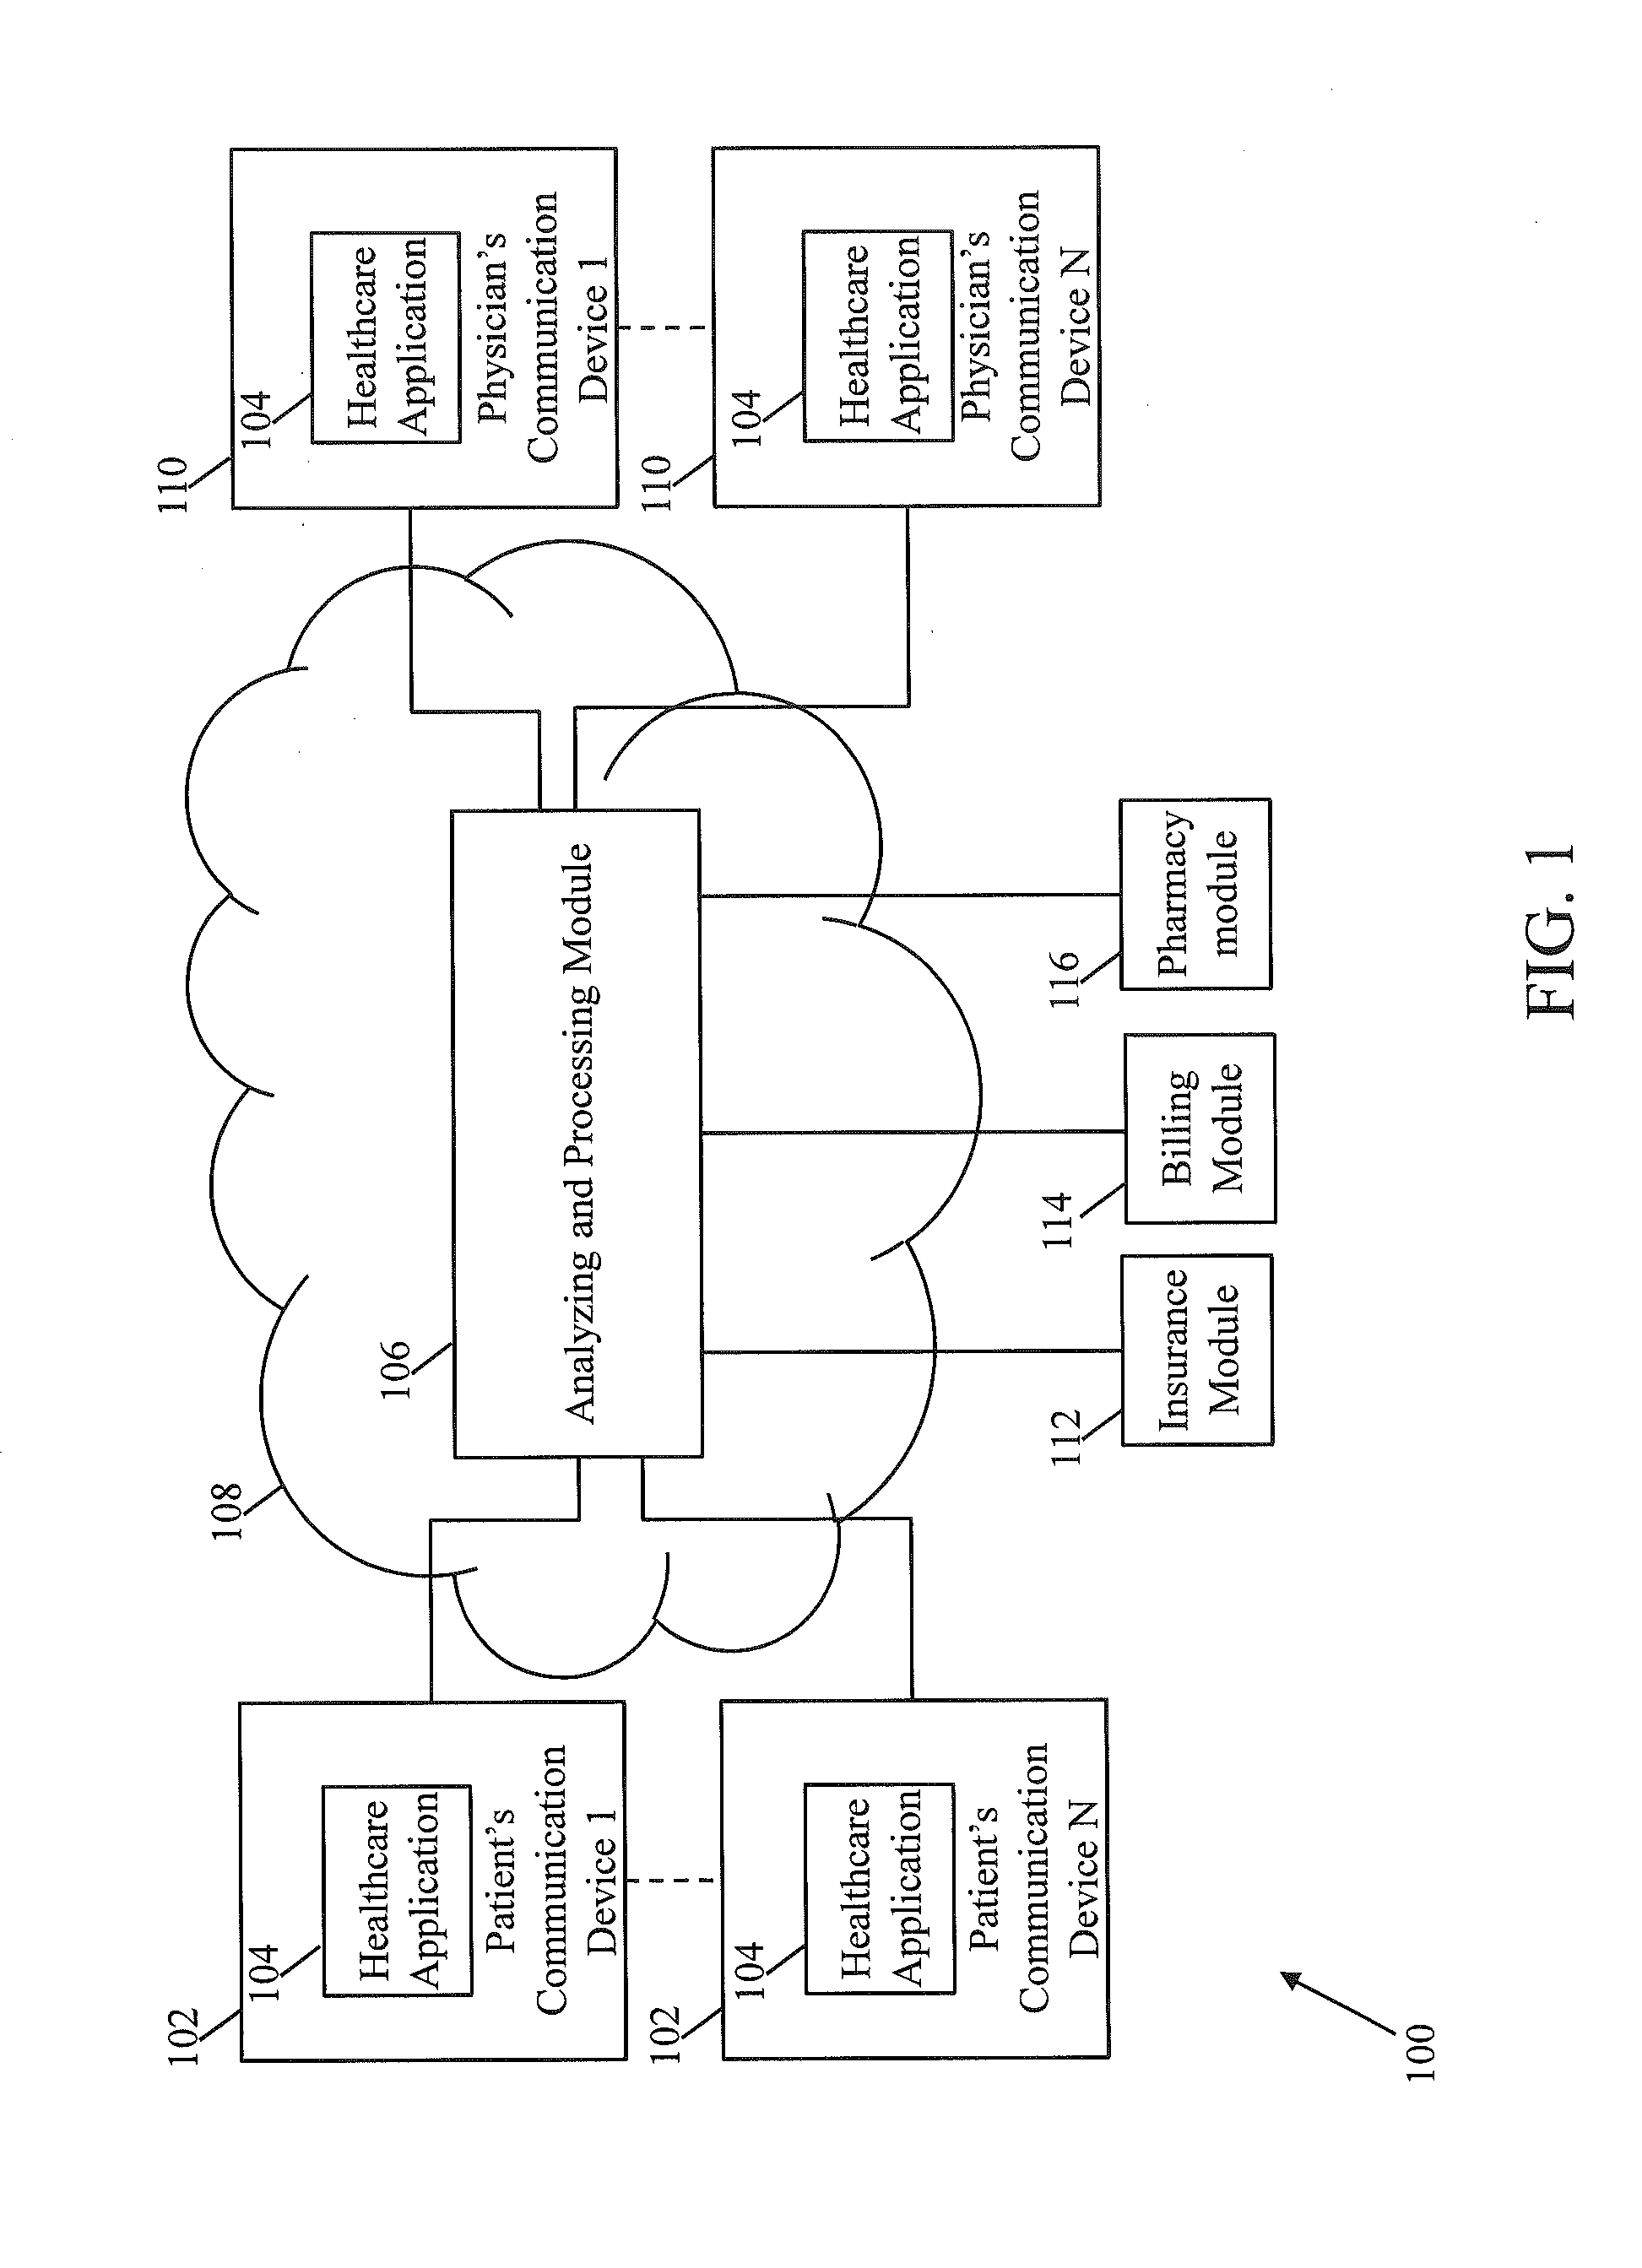 System and method for real-time monitoring and management of patients from a remote location